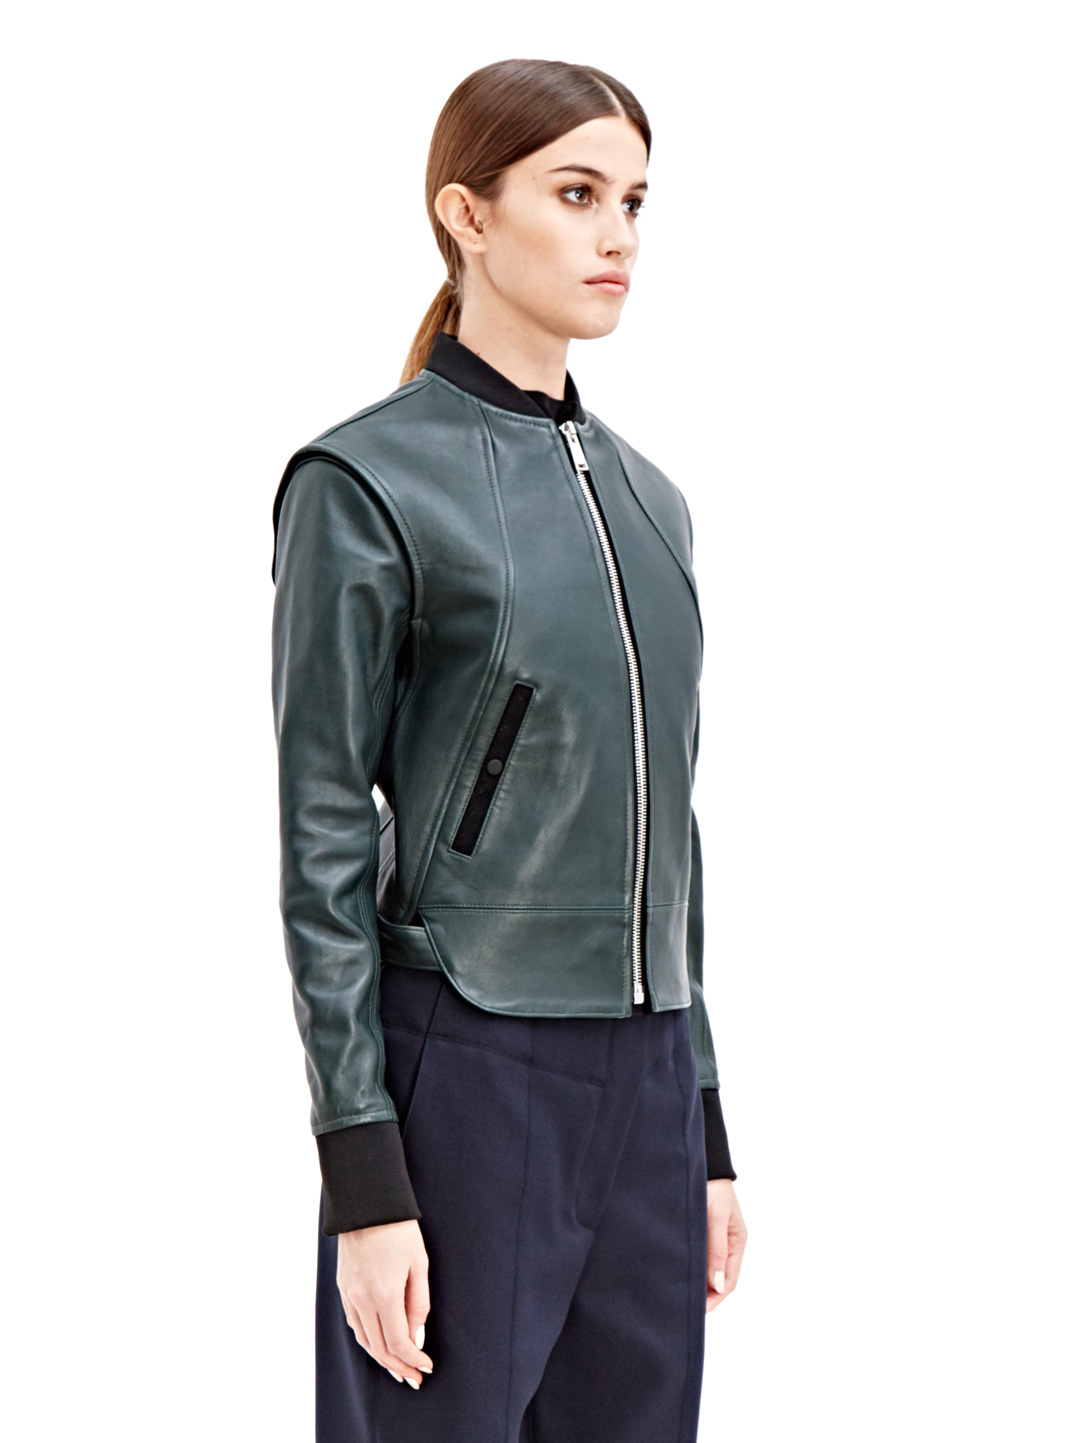 Paco rabanne Womens Leather Bomber Jacket in Green | Lyst